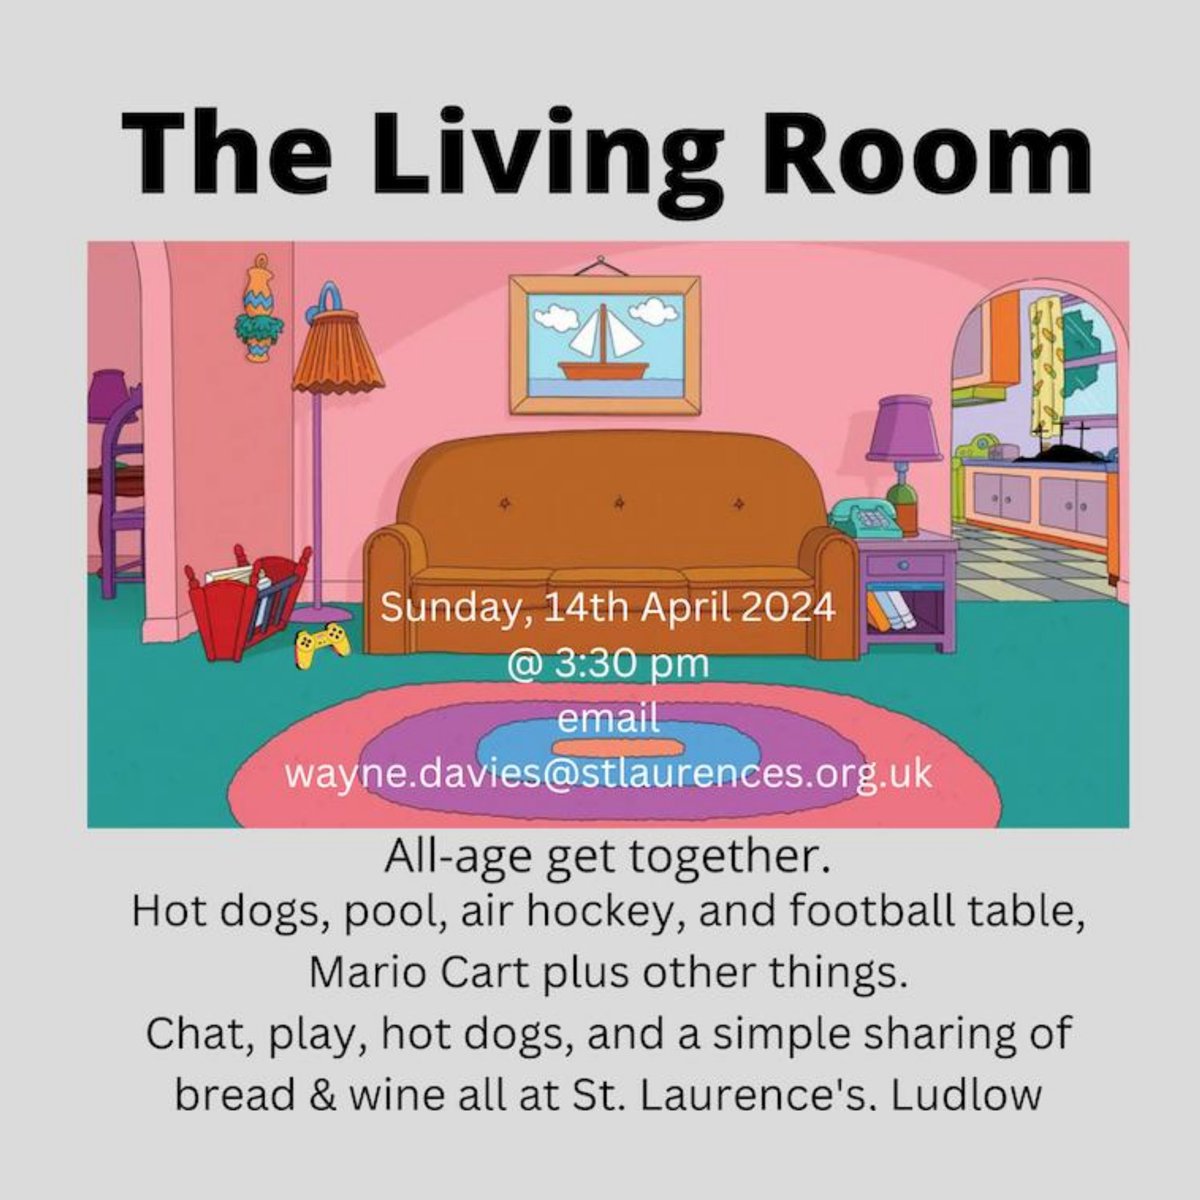 Our all-ages, informal worship gathering, The Living Room, is back this Sunday, 14th April, at 3:30pm. All are welcome!